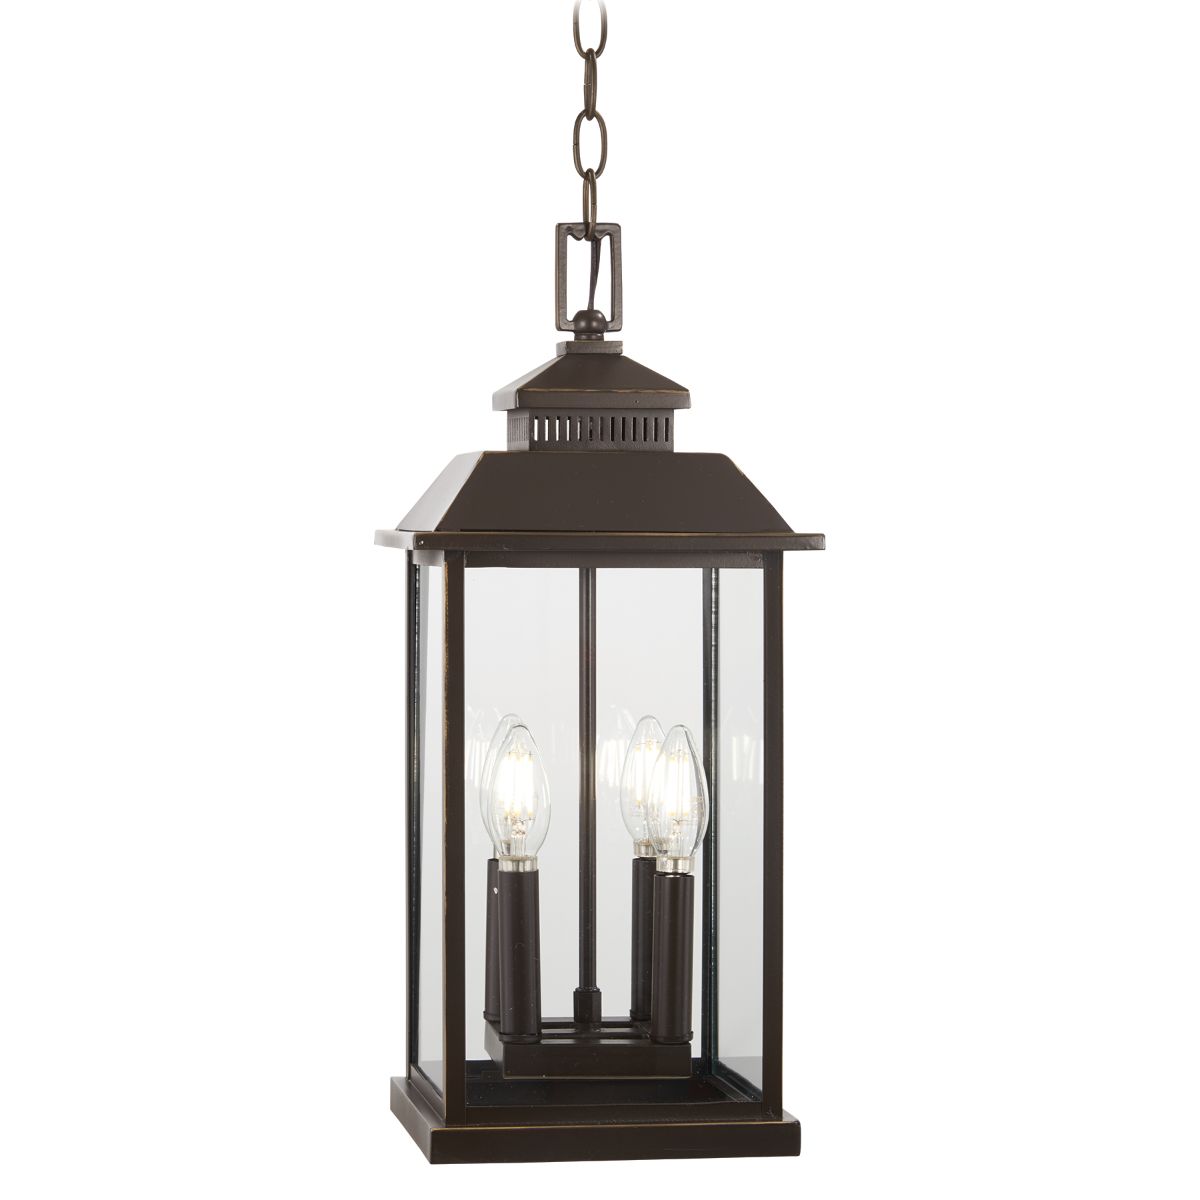 Miner's Lof 4 lights 9 in. Outdoor Hanging Lantern Oil Rubbed Bronze & Gold finish